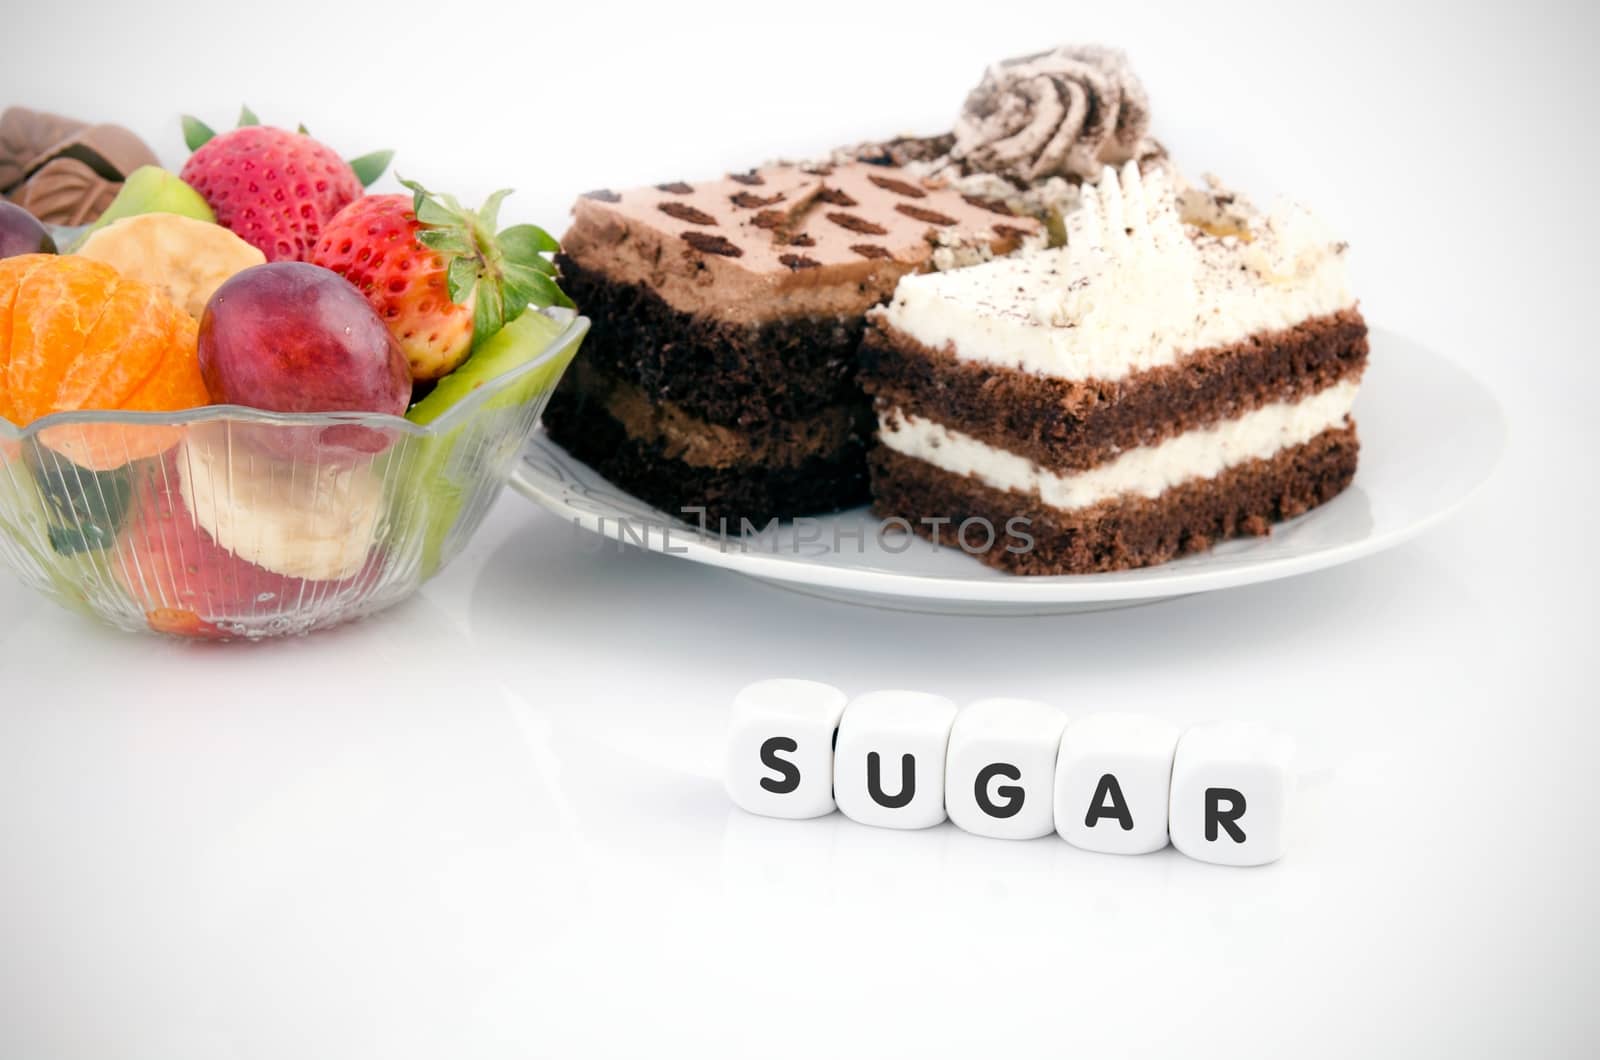 Sugar word on dices. Cake and fruits in babkground